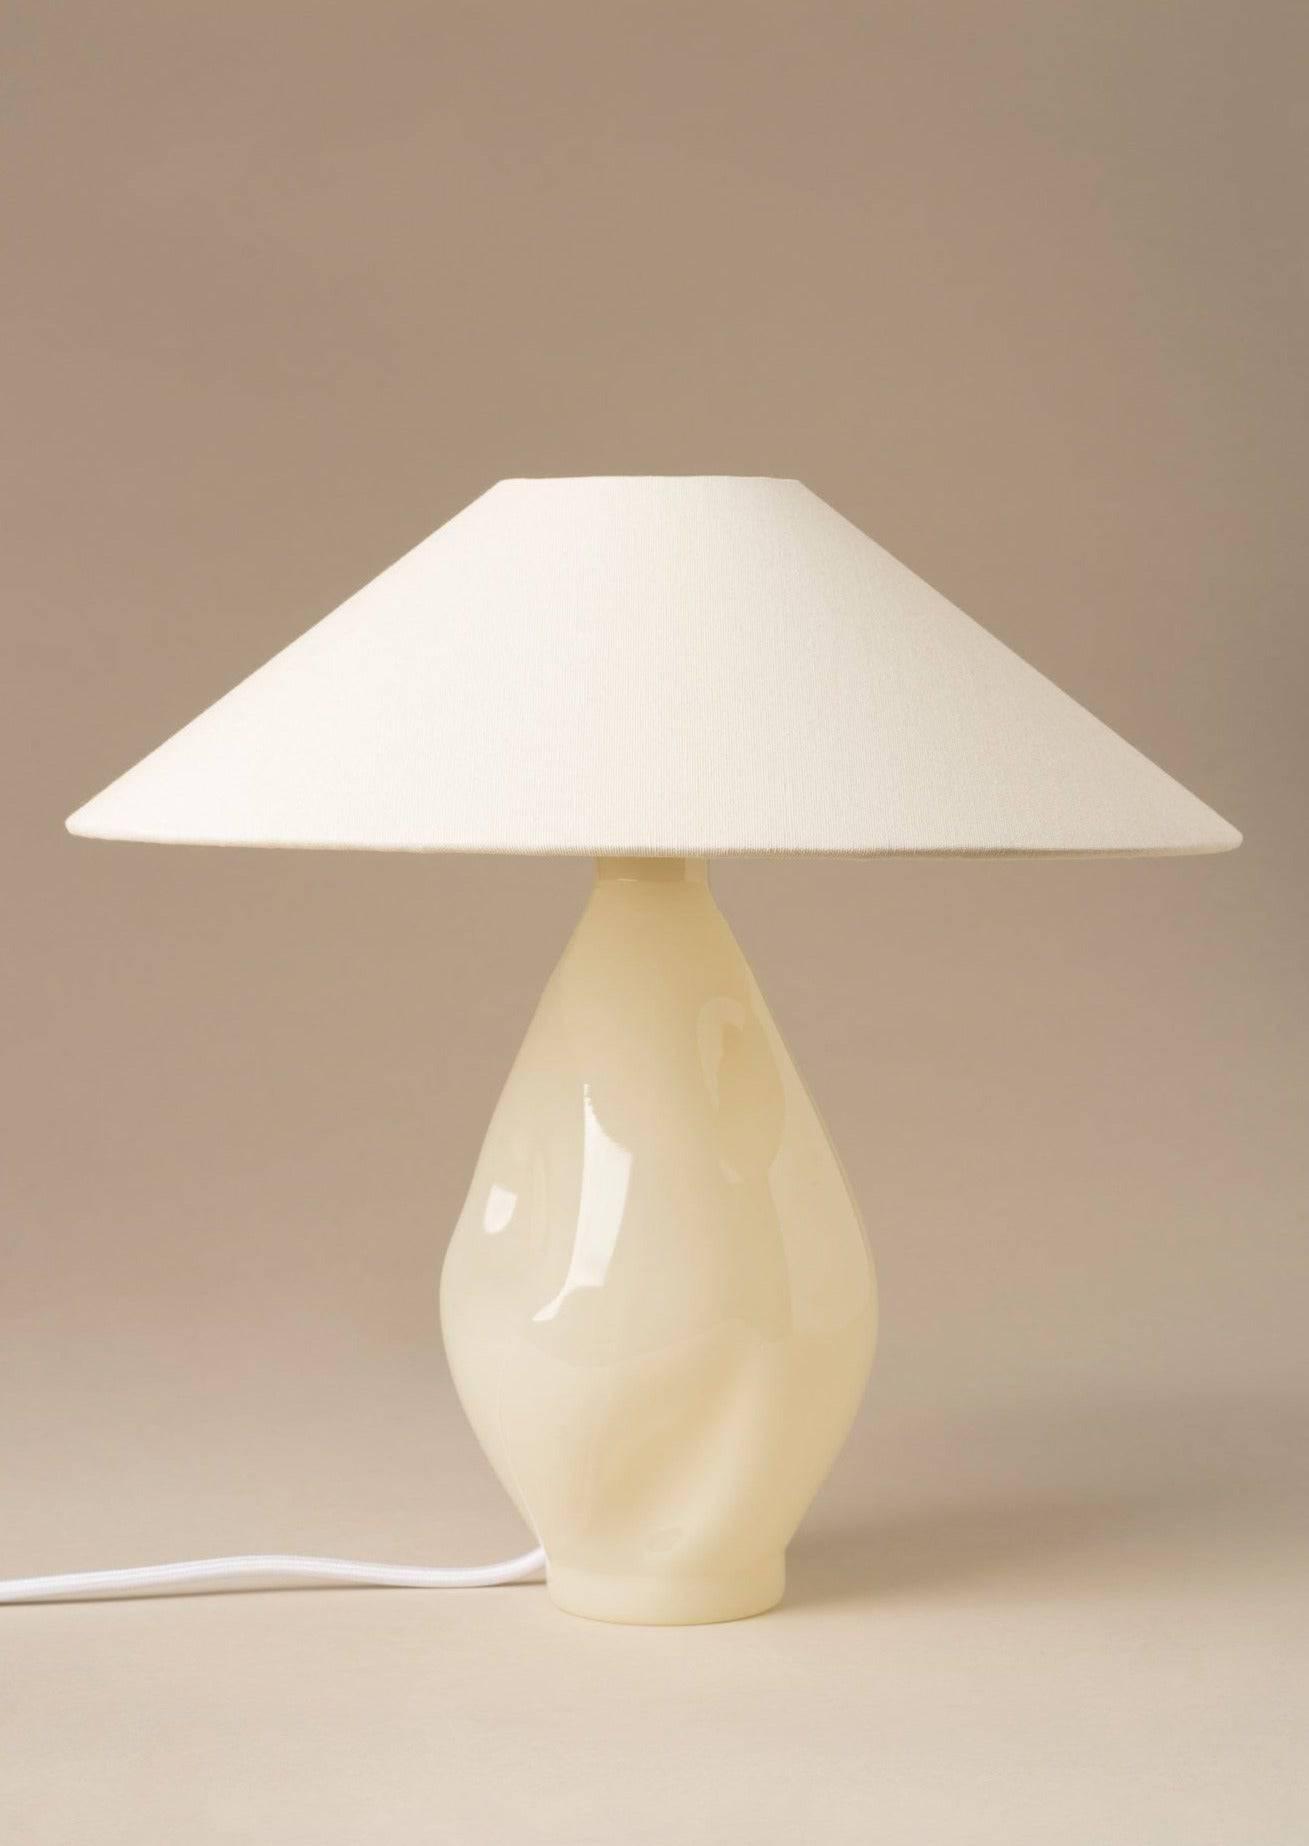 A cream-colored table lamp with a glossy ceramic base and a large, flat, Beige Conical Glass shade, set against a neutral beige background by Los Objetos Decorativos.